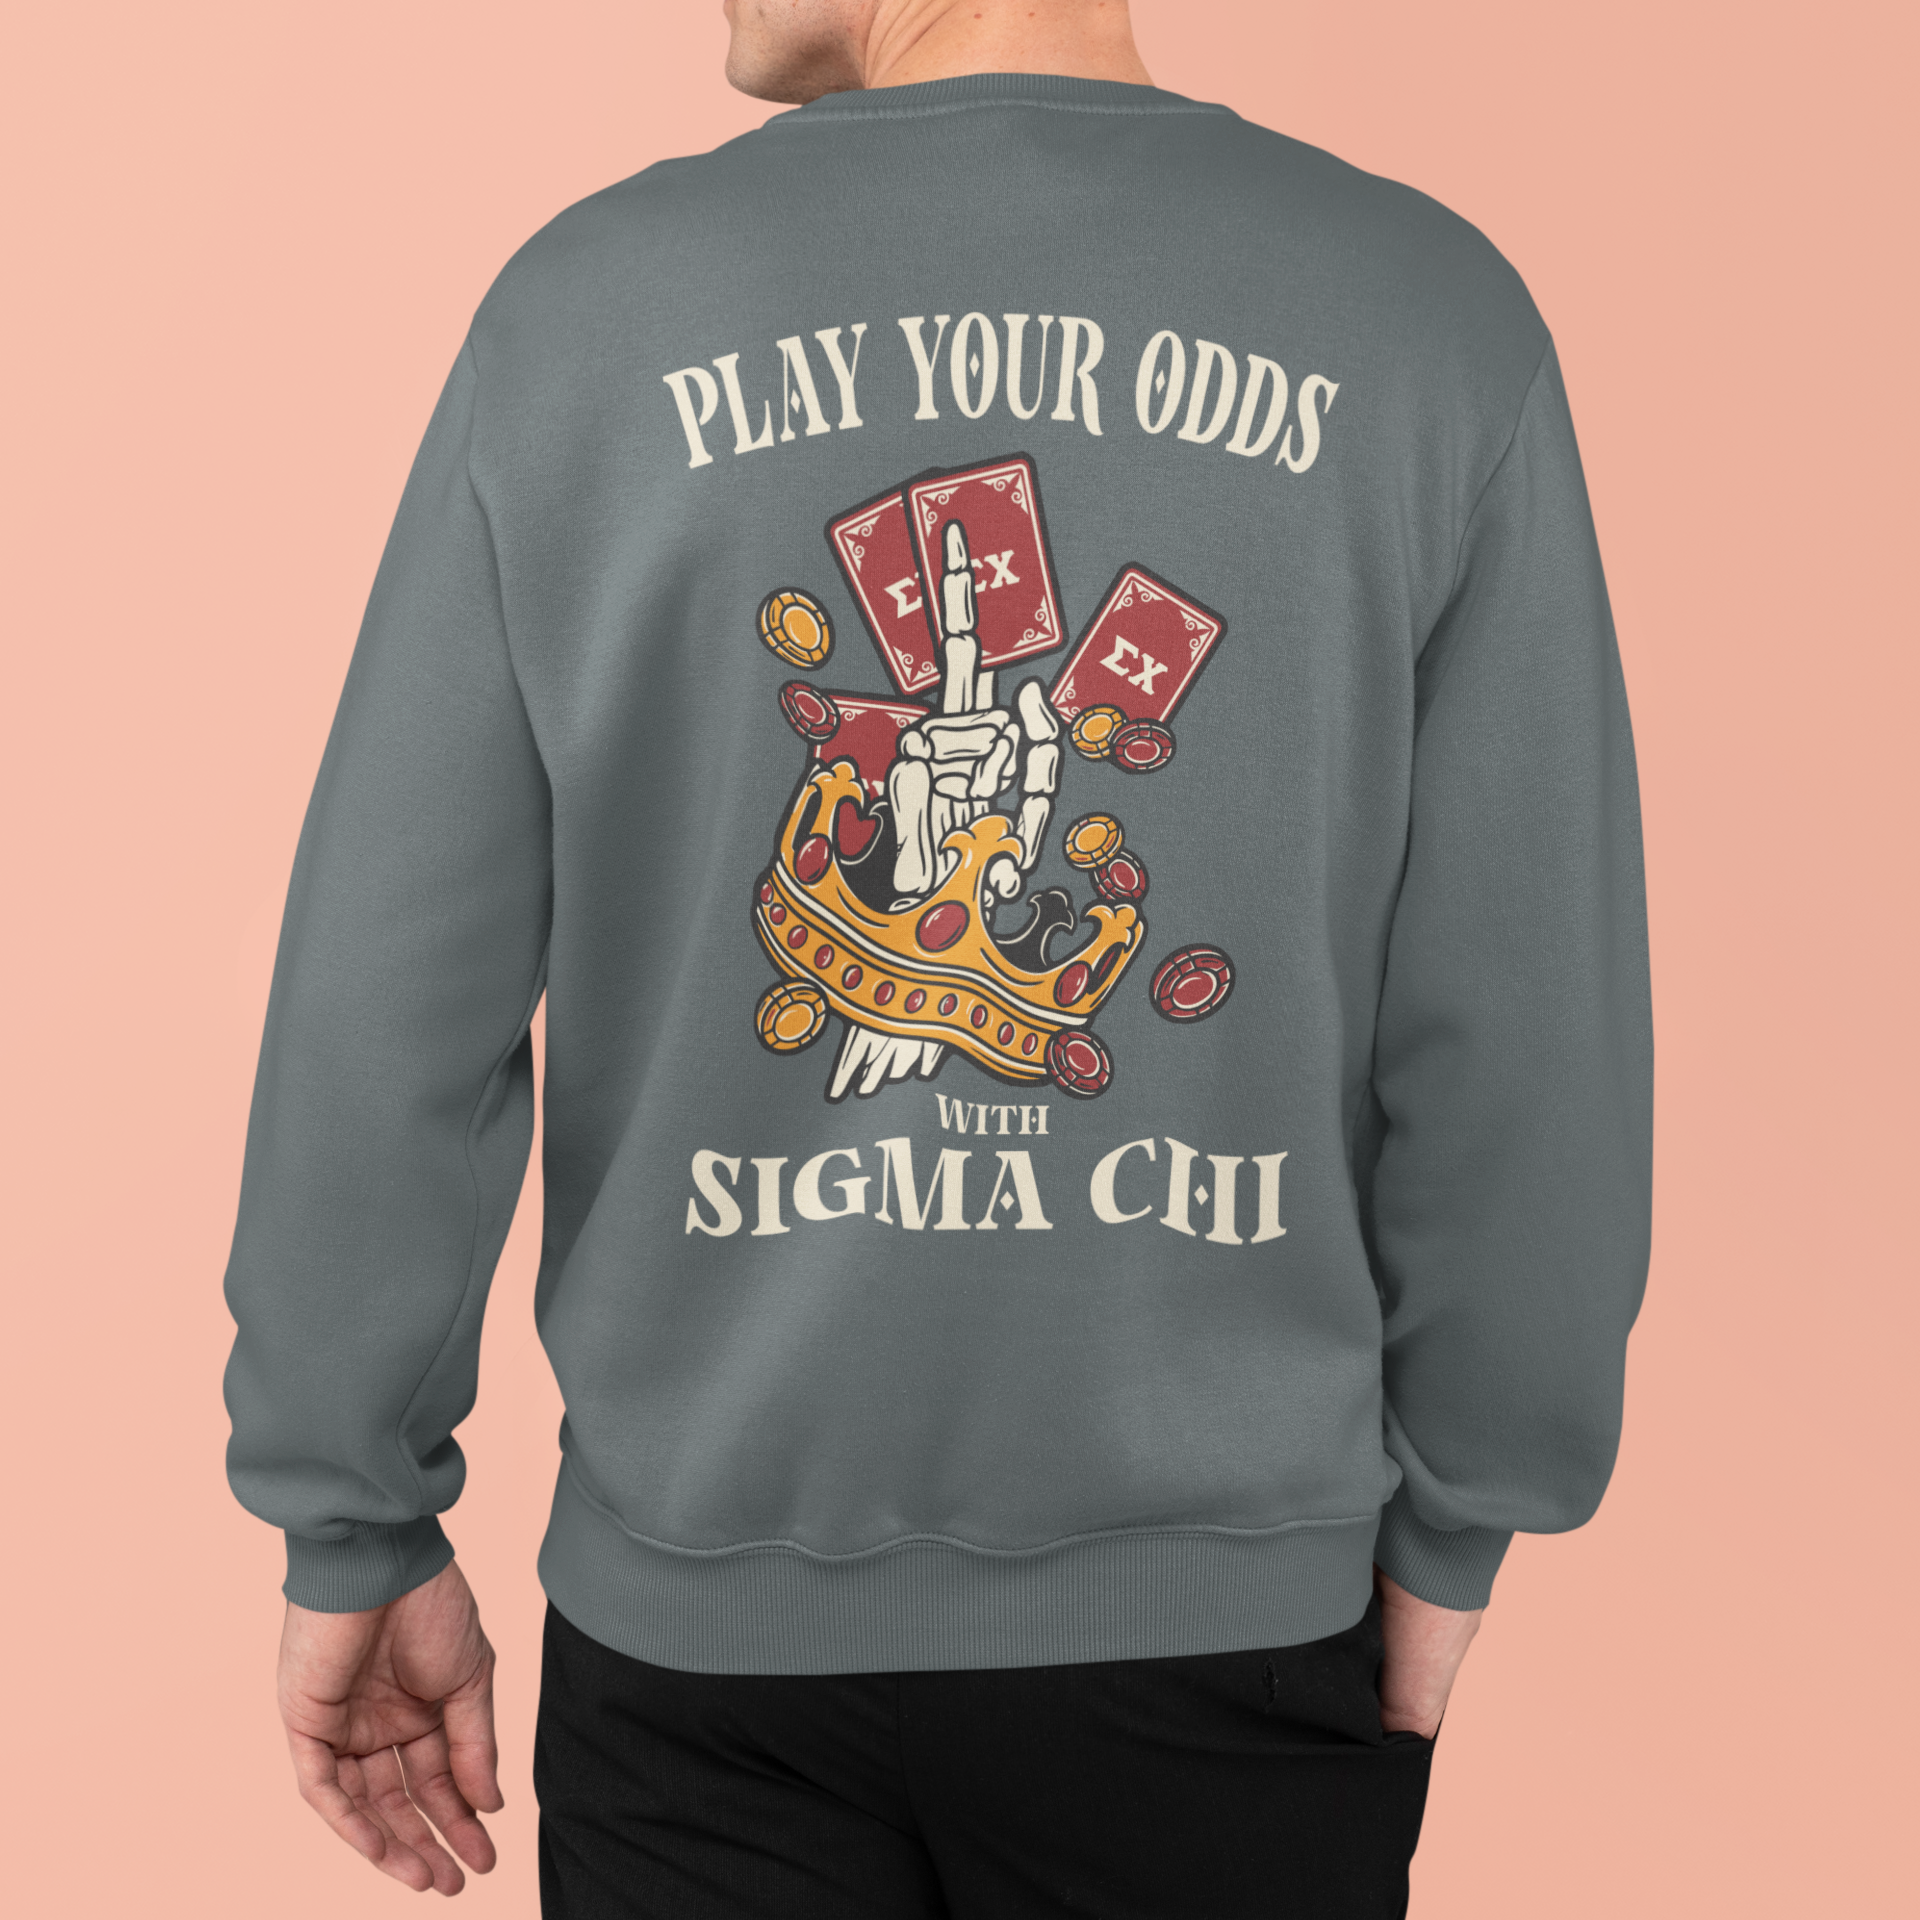 Sigma Chi Graphic Crewneck Sweatshirt | Play Your Odds | Sigma Chi Fraternity Merch House model 